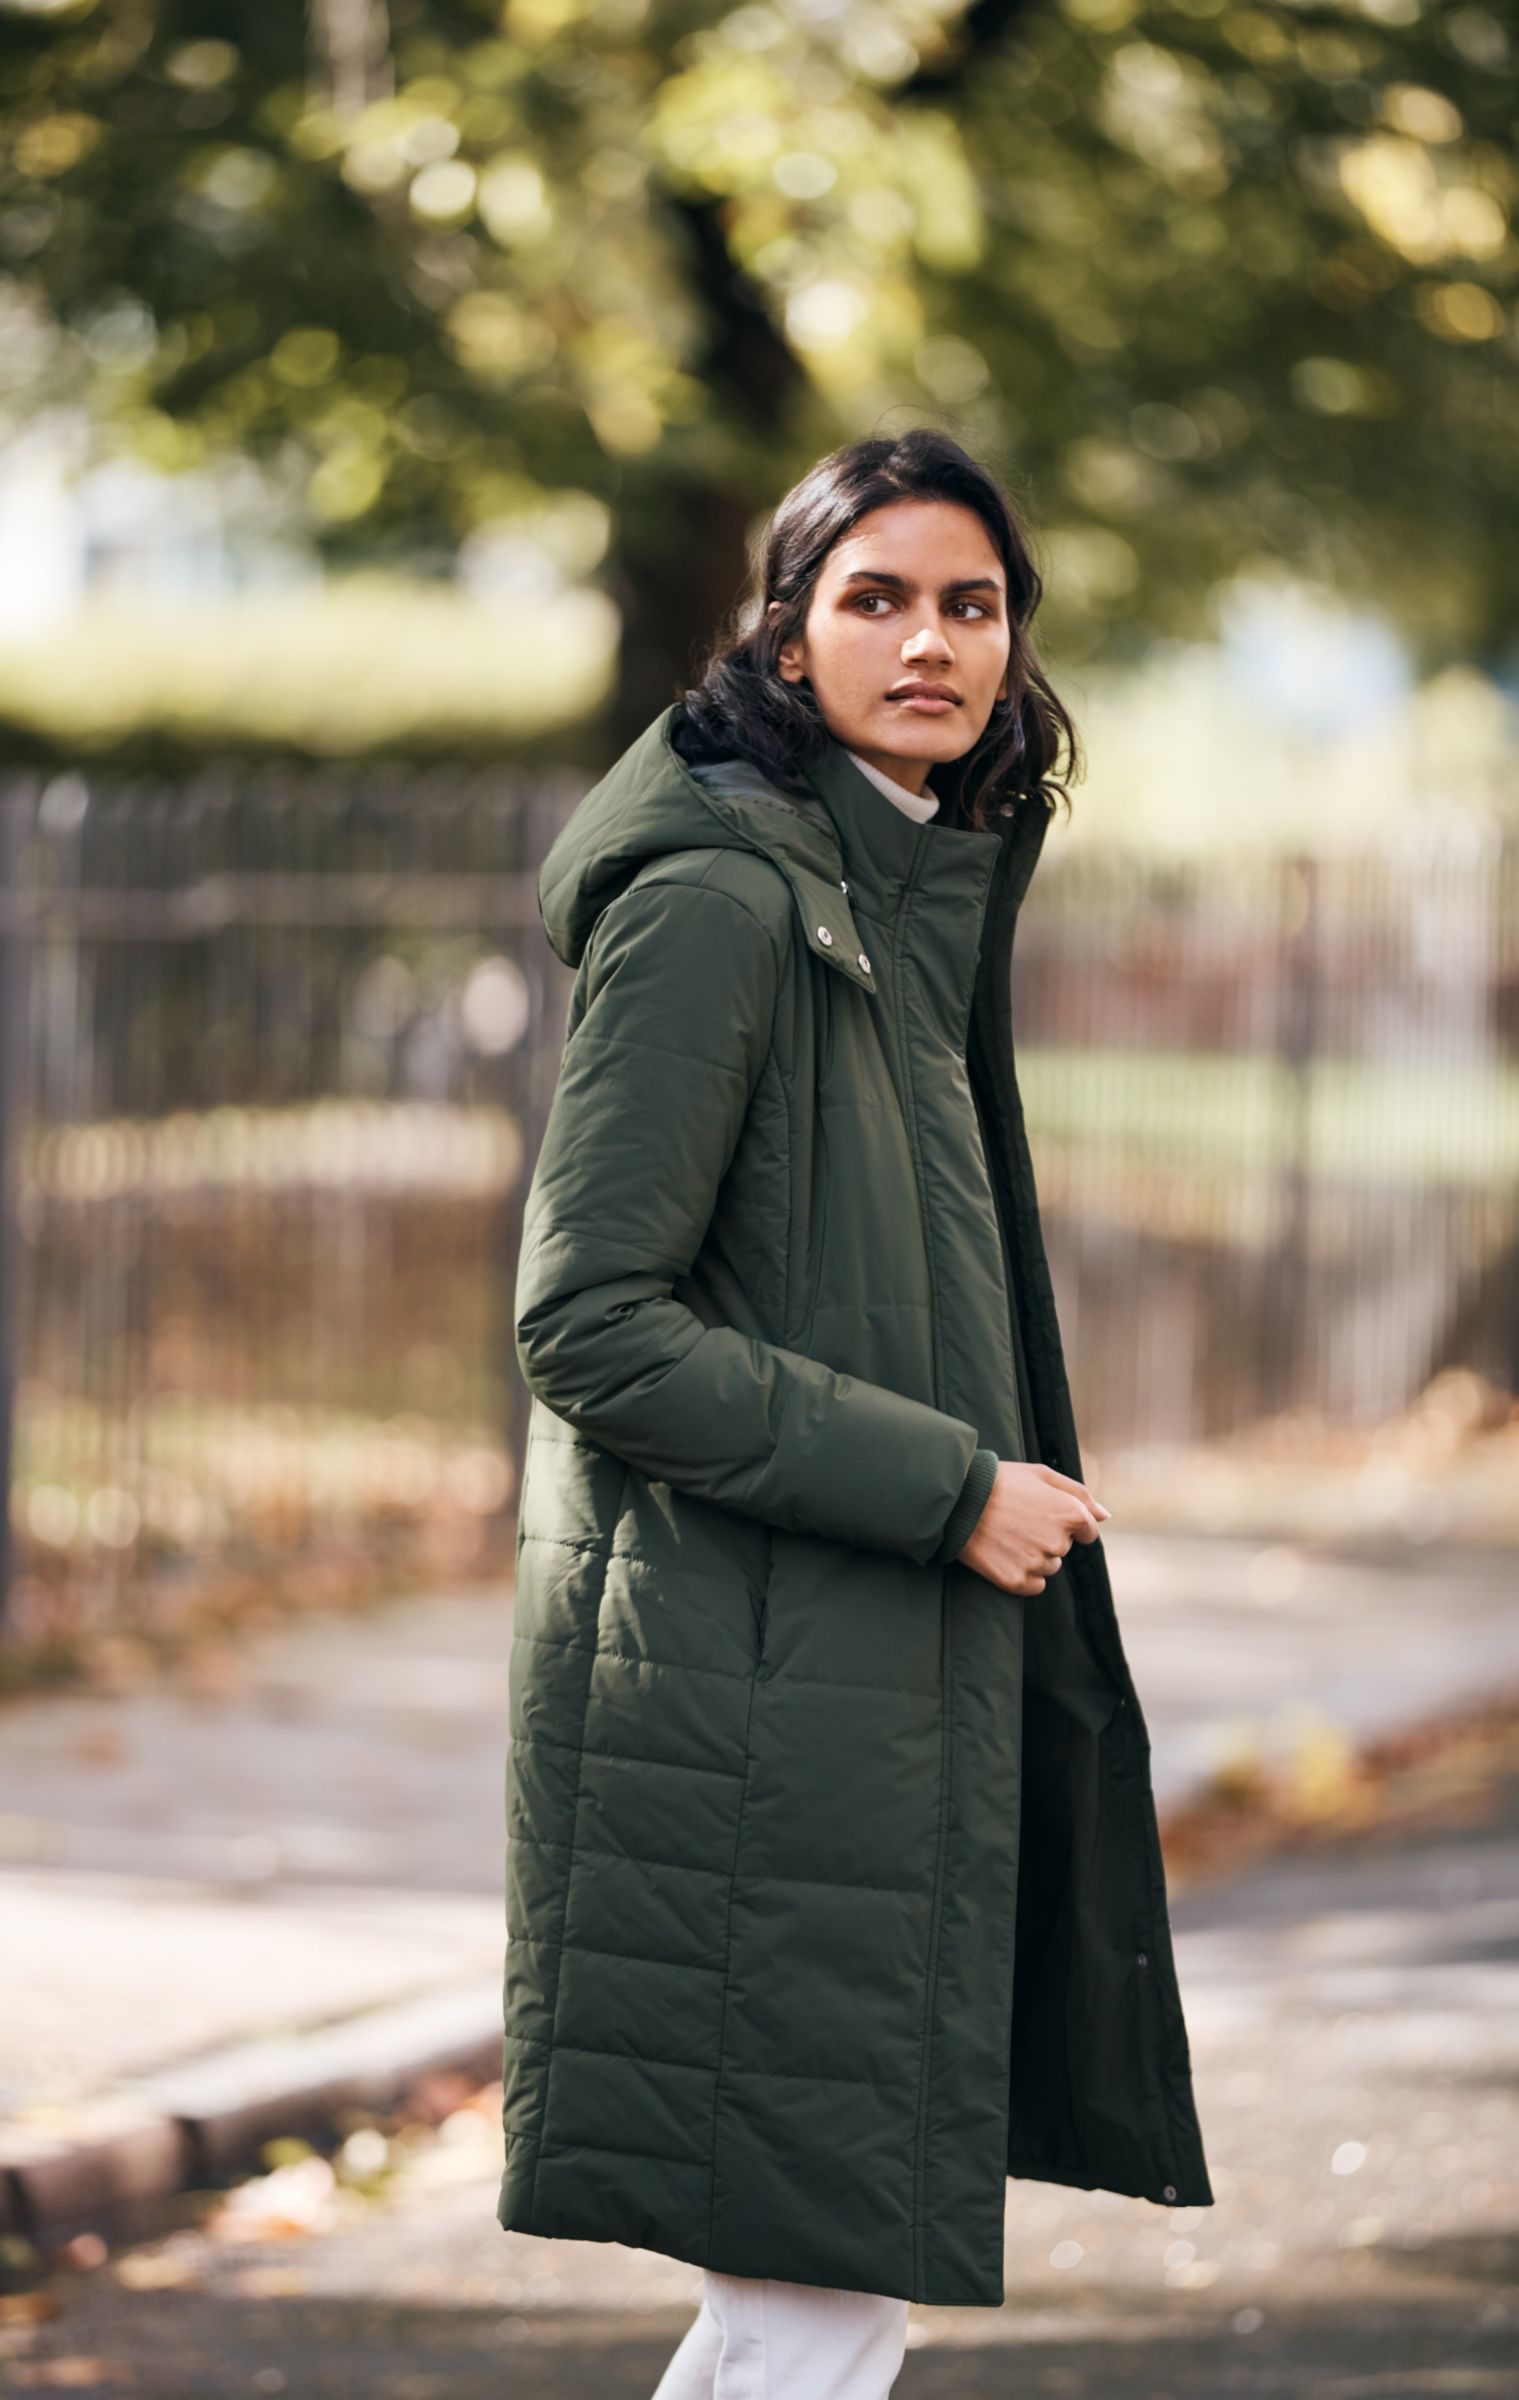 How To Choose The Best Winter Coats For Women